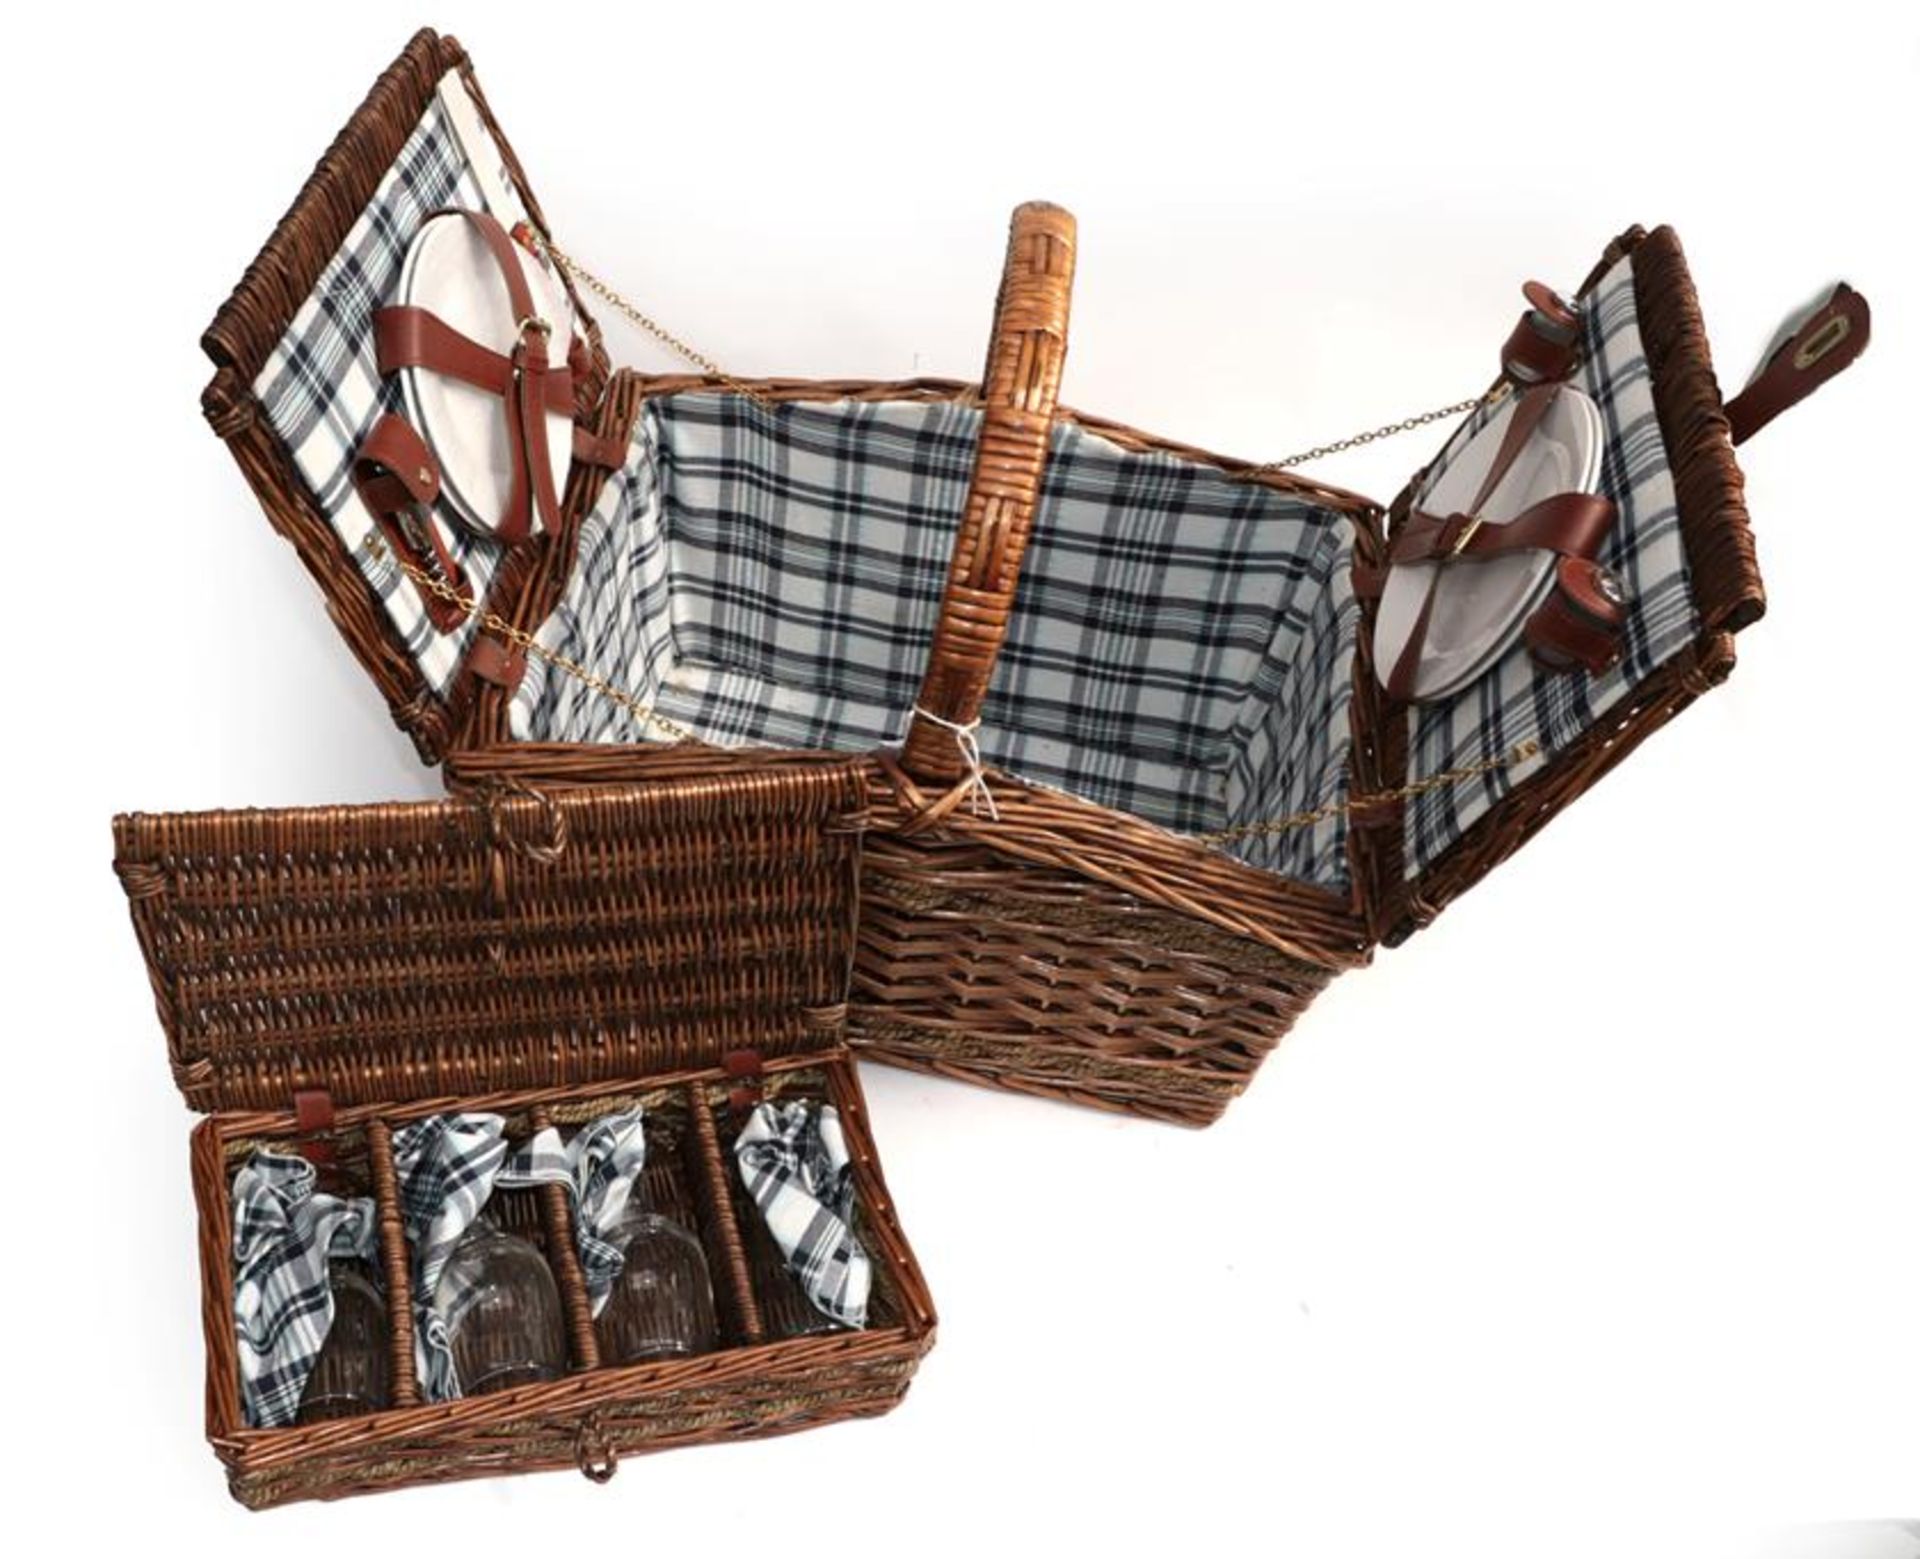 A Mercedes-Benz Picnic Hamper, apparently in unused condition, the blue and white tartan lined